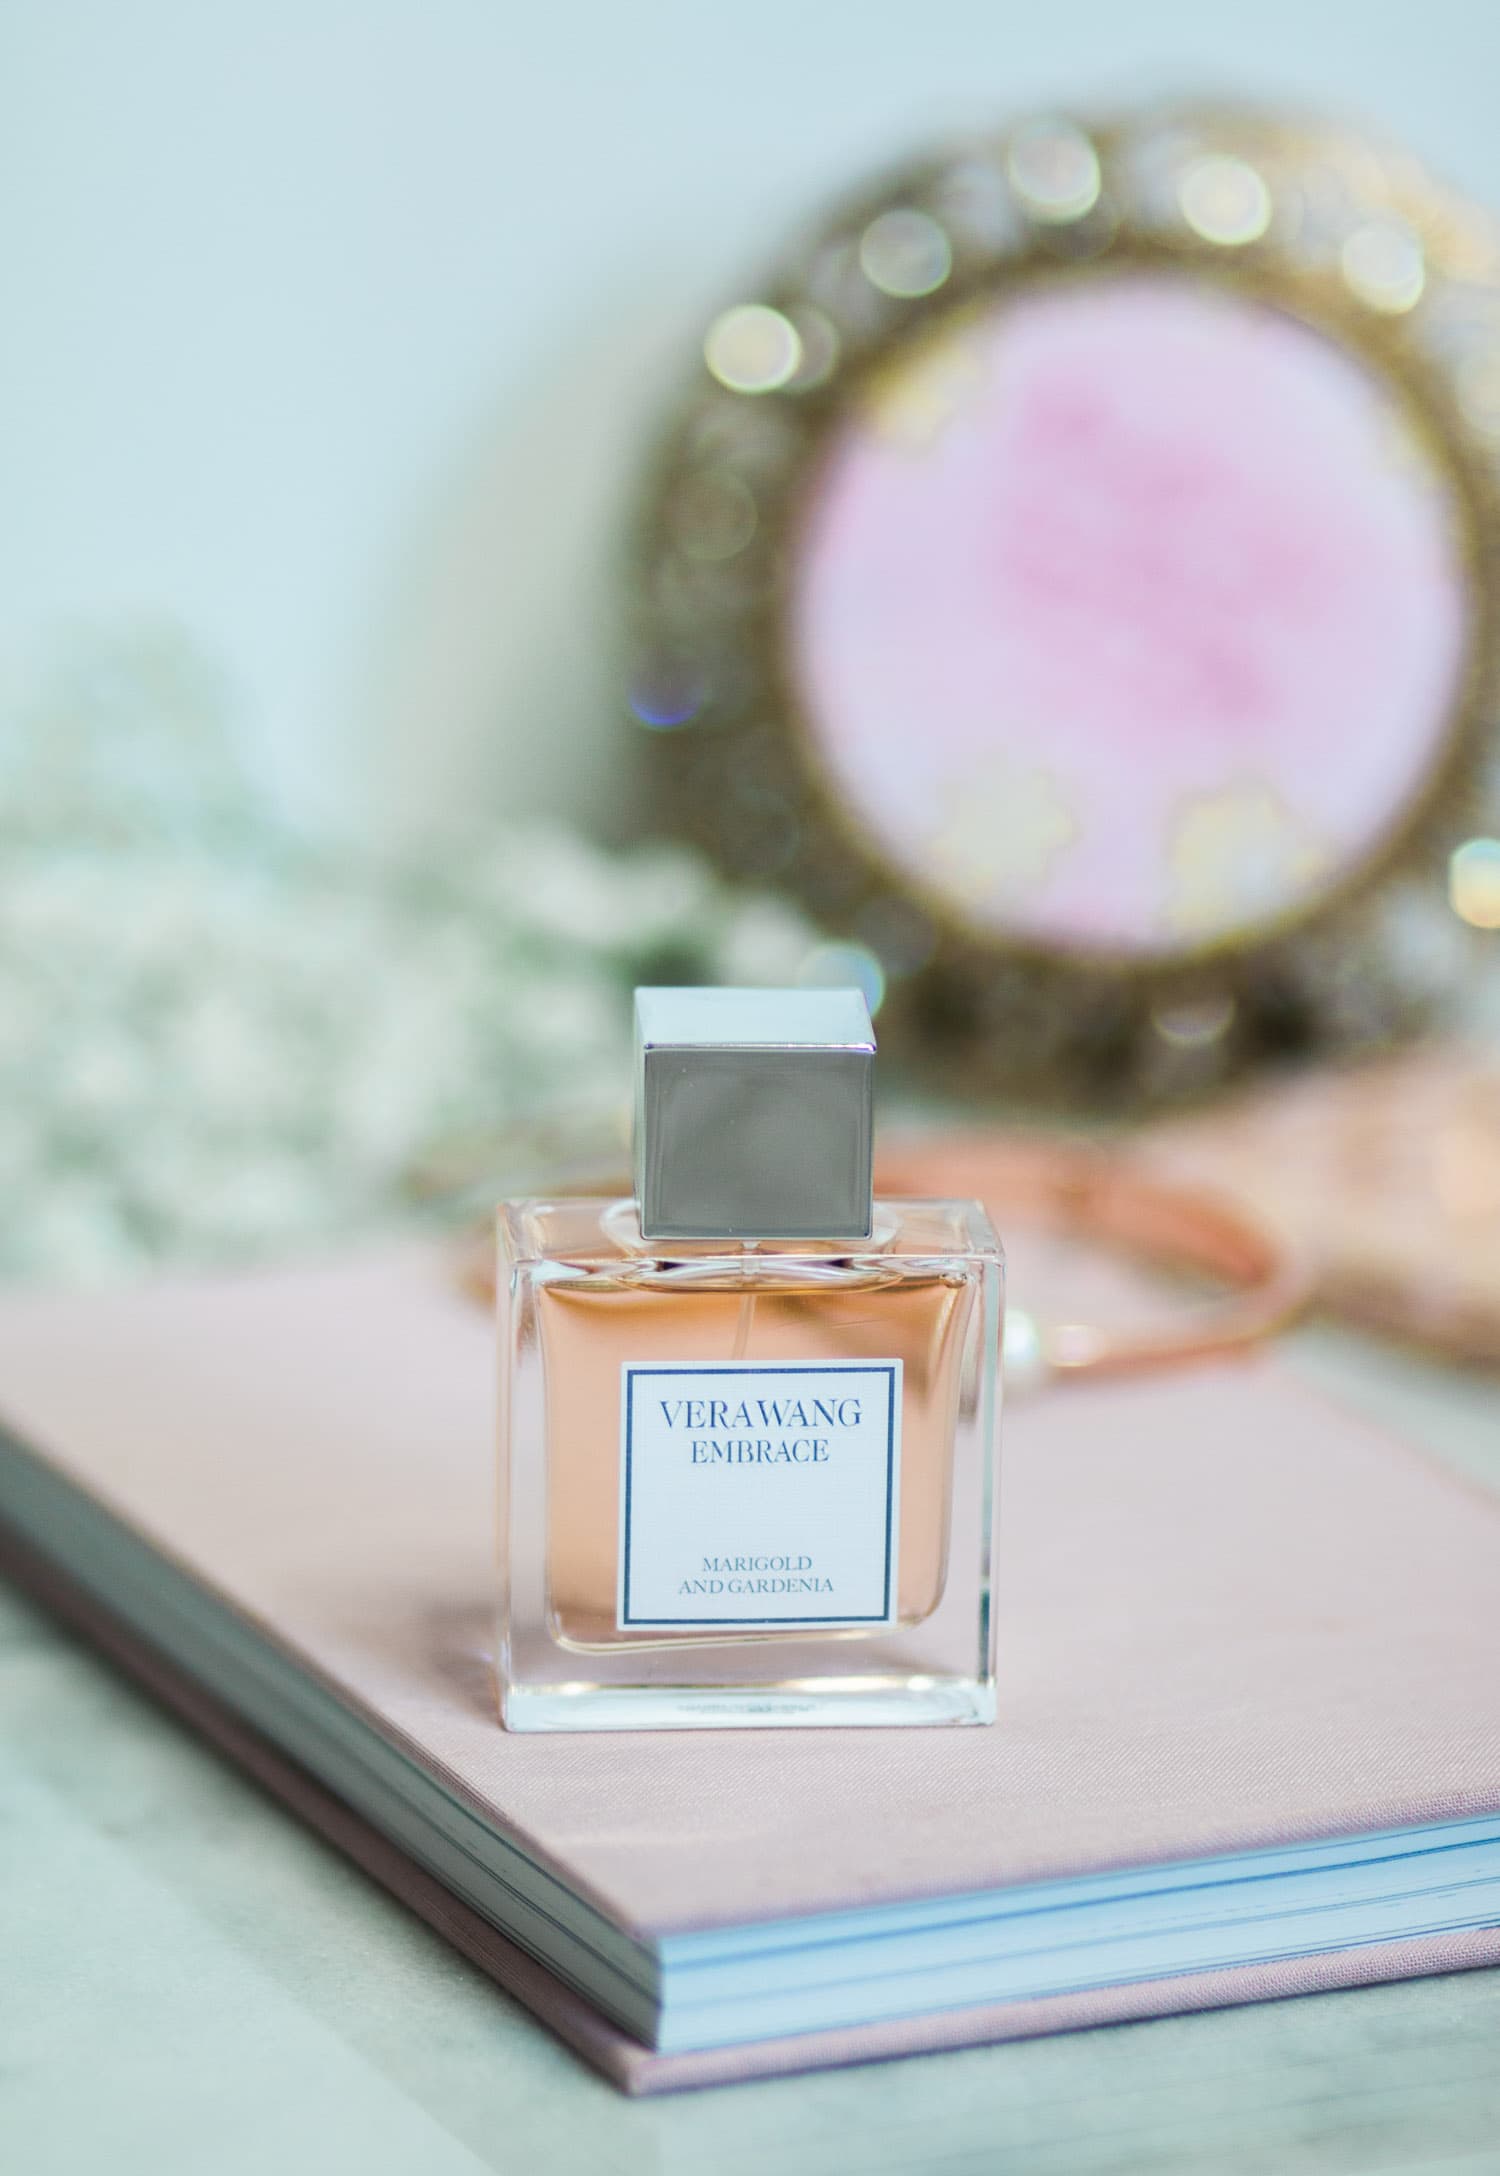 Looking for the perfect light floral fragrance? Ashley Brooke is sharing her thoughts on the Vera Wang Embrace Marigold and Gardenia perfume from Kohl's!